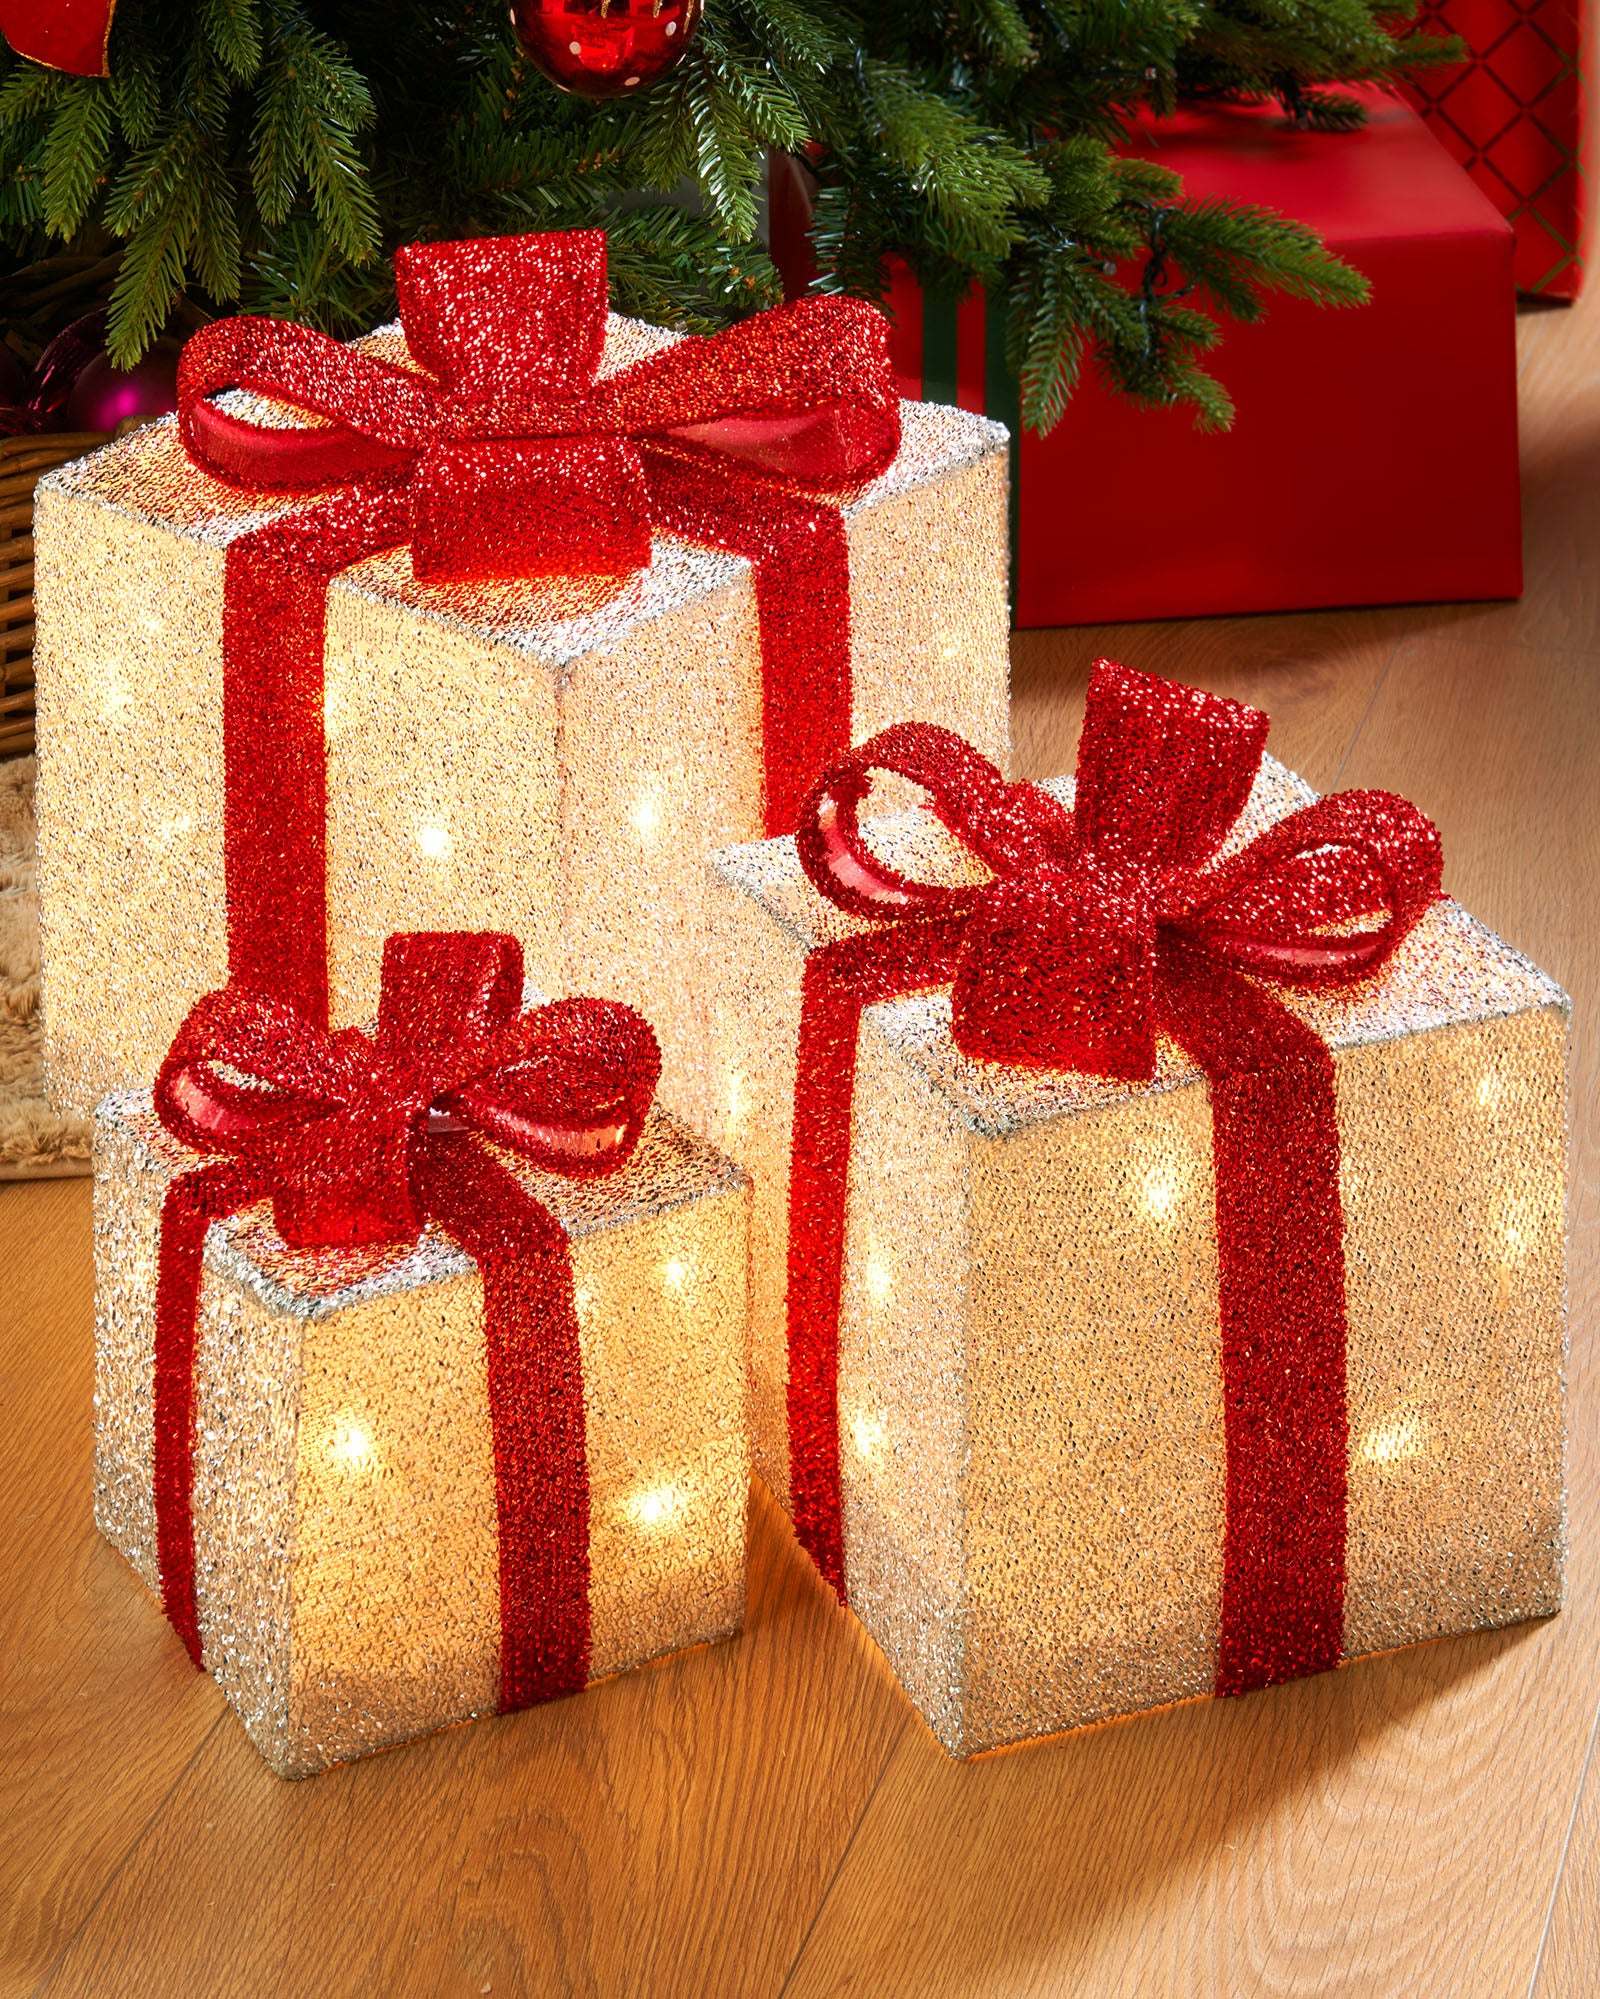 Homemade Gift Box Decoration for Christmas Stock Photo - Image of craft,  idea: 100468010